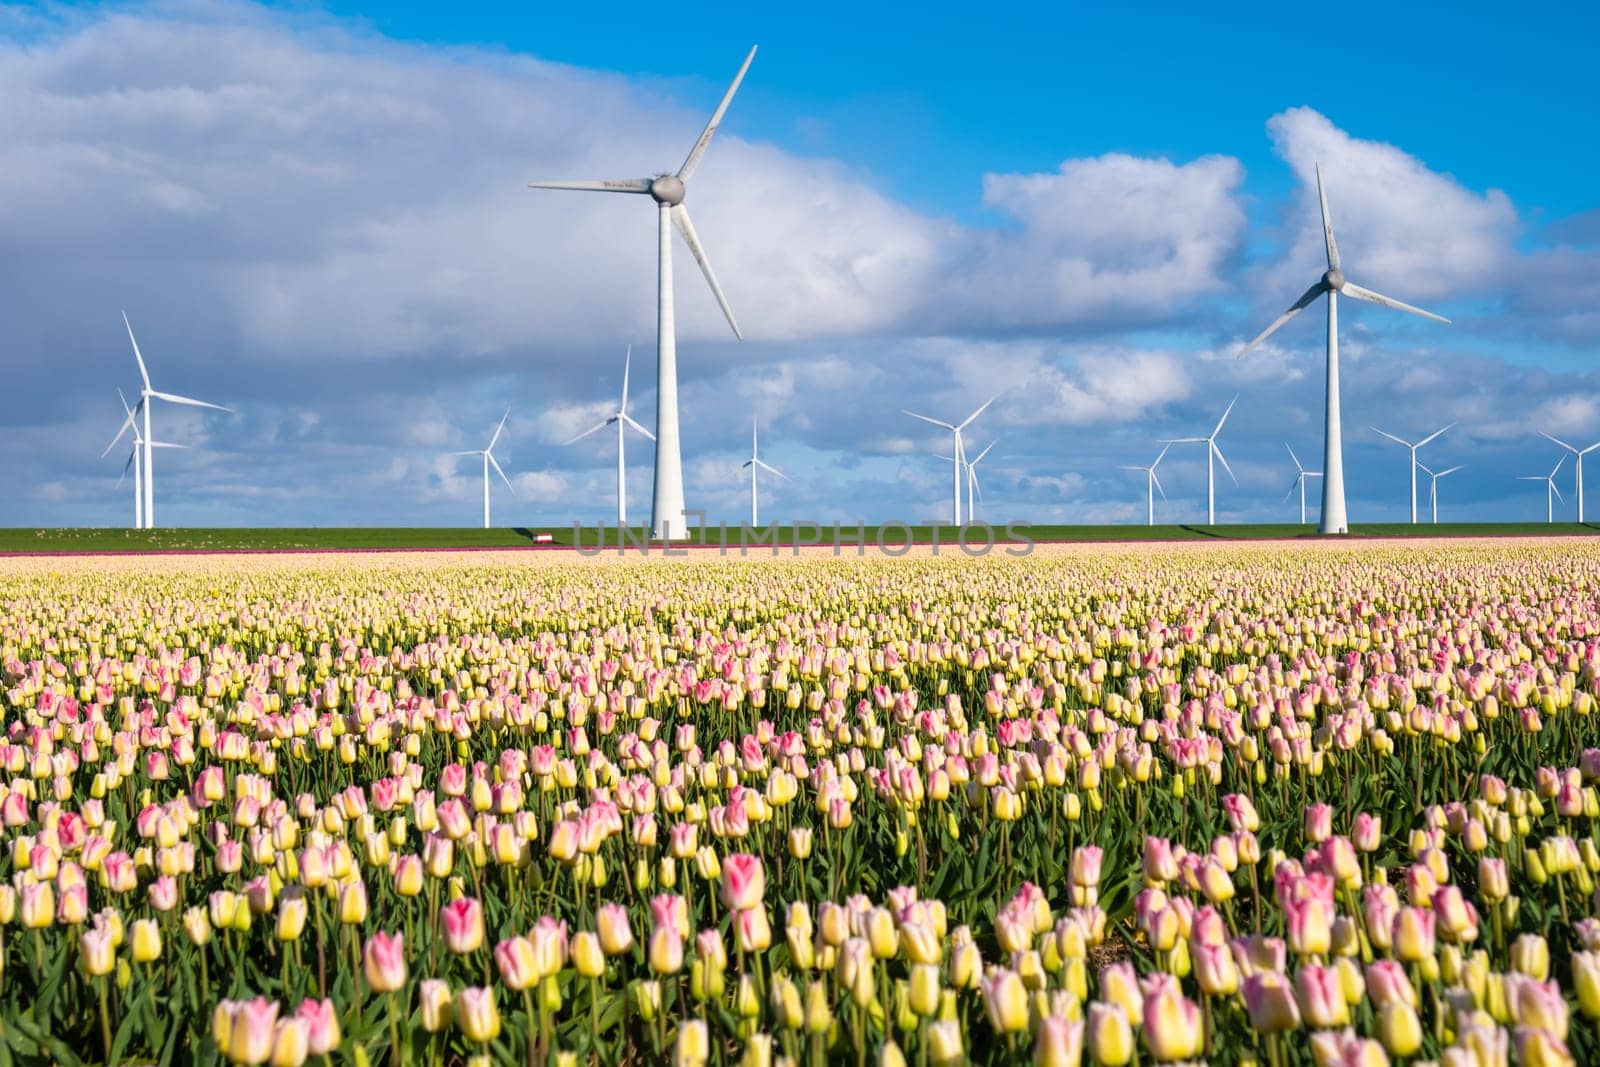 Vibrant tulips sway gracefully in a field as majestic windmills stand tall in the background, creating a picturesque scene of Dutch countryside in spring by fokkebok